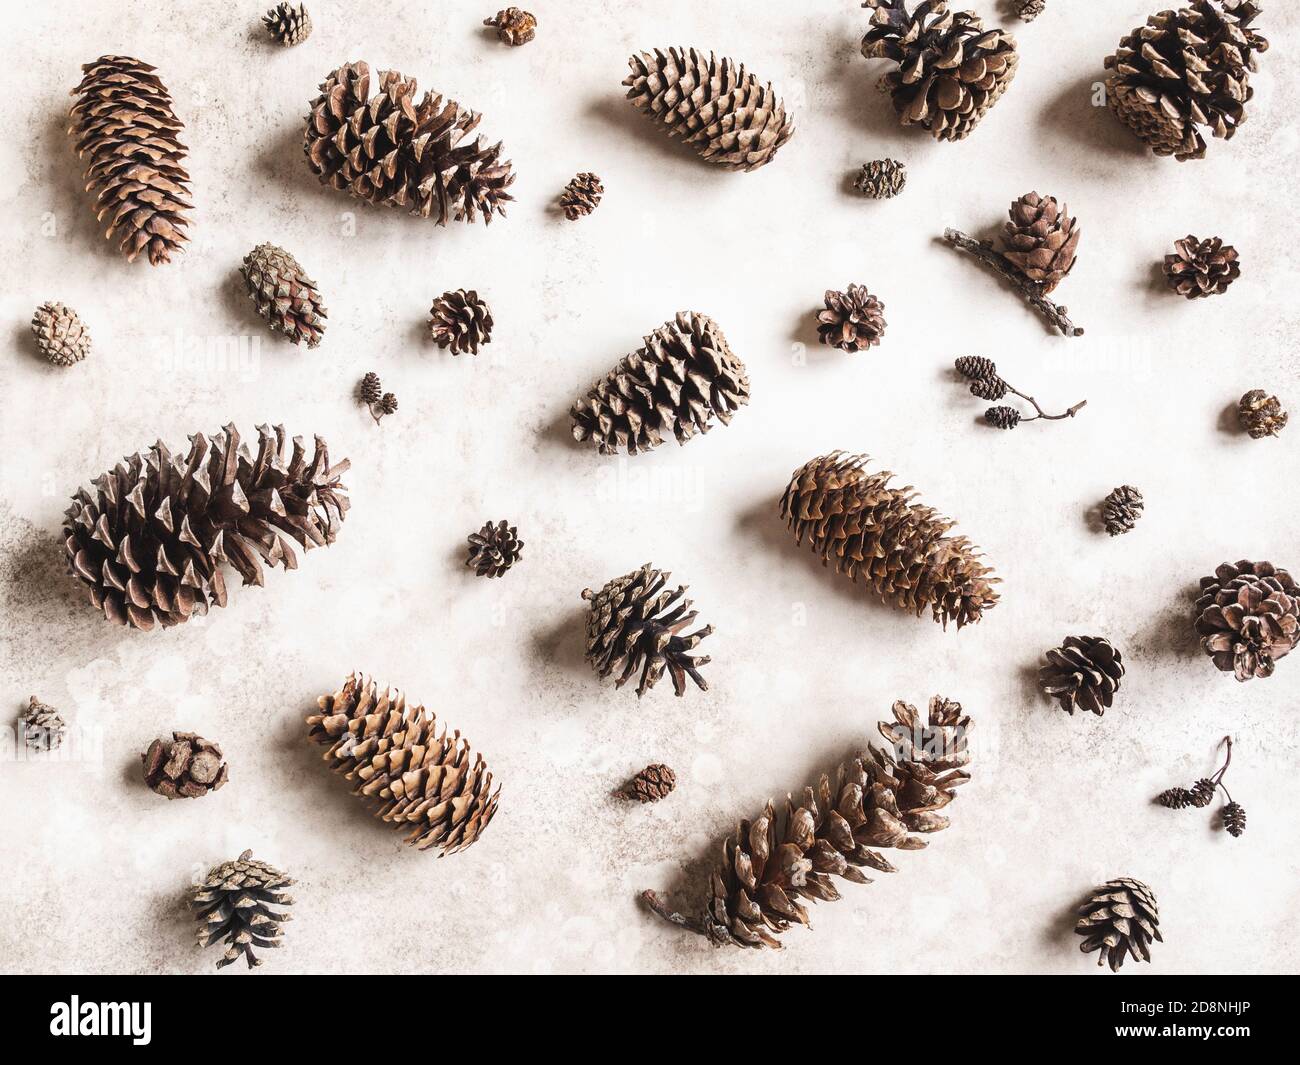 Collection of various conifers cones. Christmas set various cones of sequoia, pine, spruce, fir on brown background. Botanical evergreen flat lay. Stock Photo